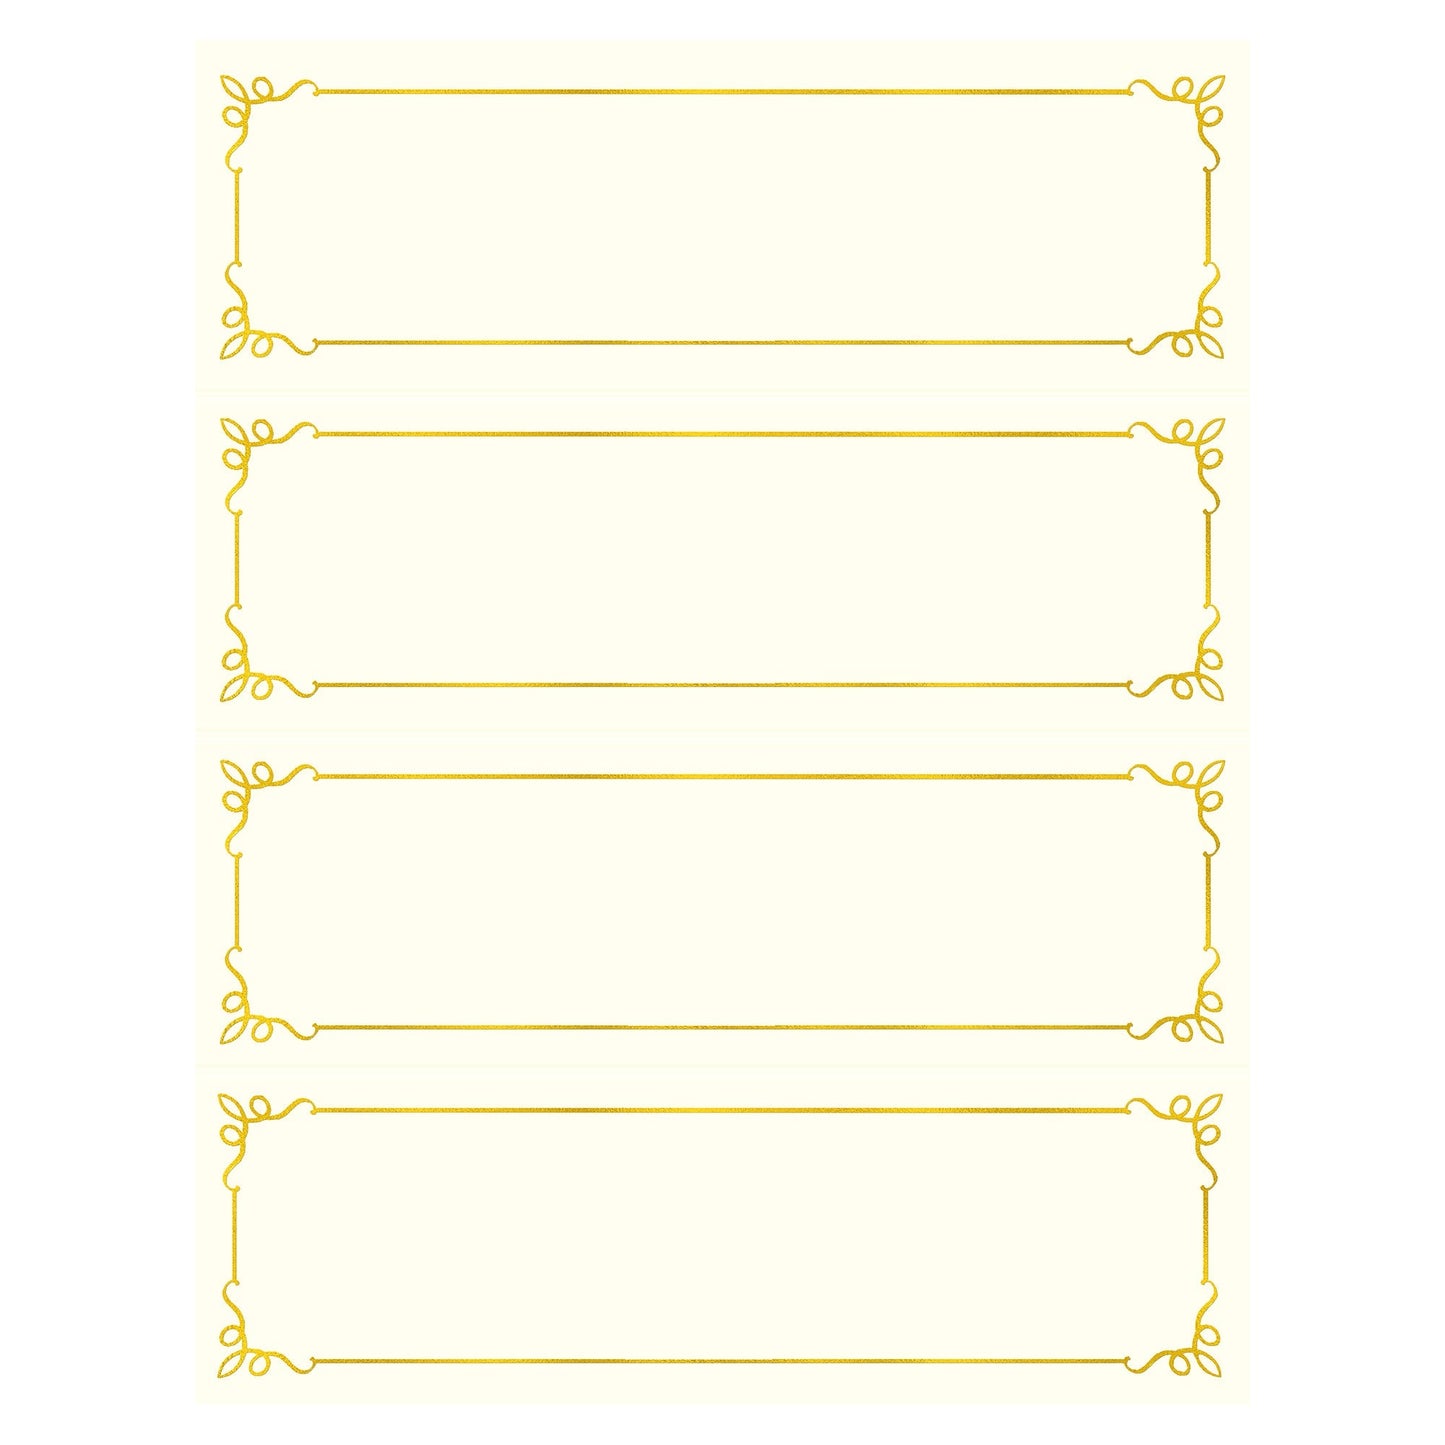 St. James® Overtures® Embassy Tent Cards, Ivory, Gold Foil, Fold to 8½ x 2¾", Pack of 50, 71446